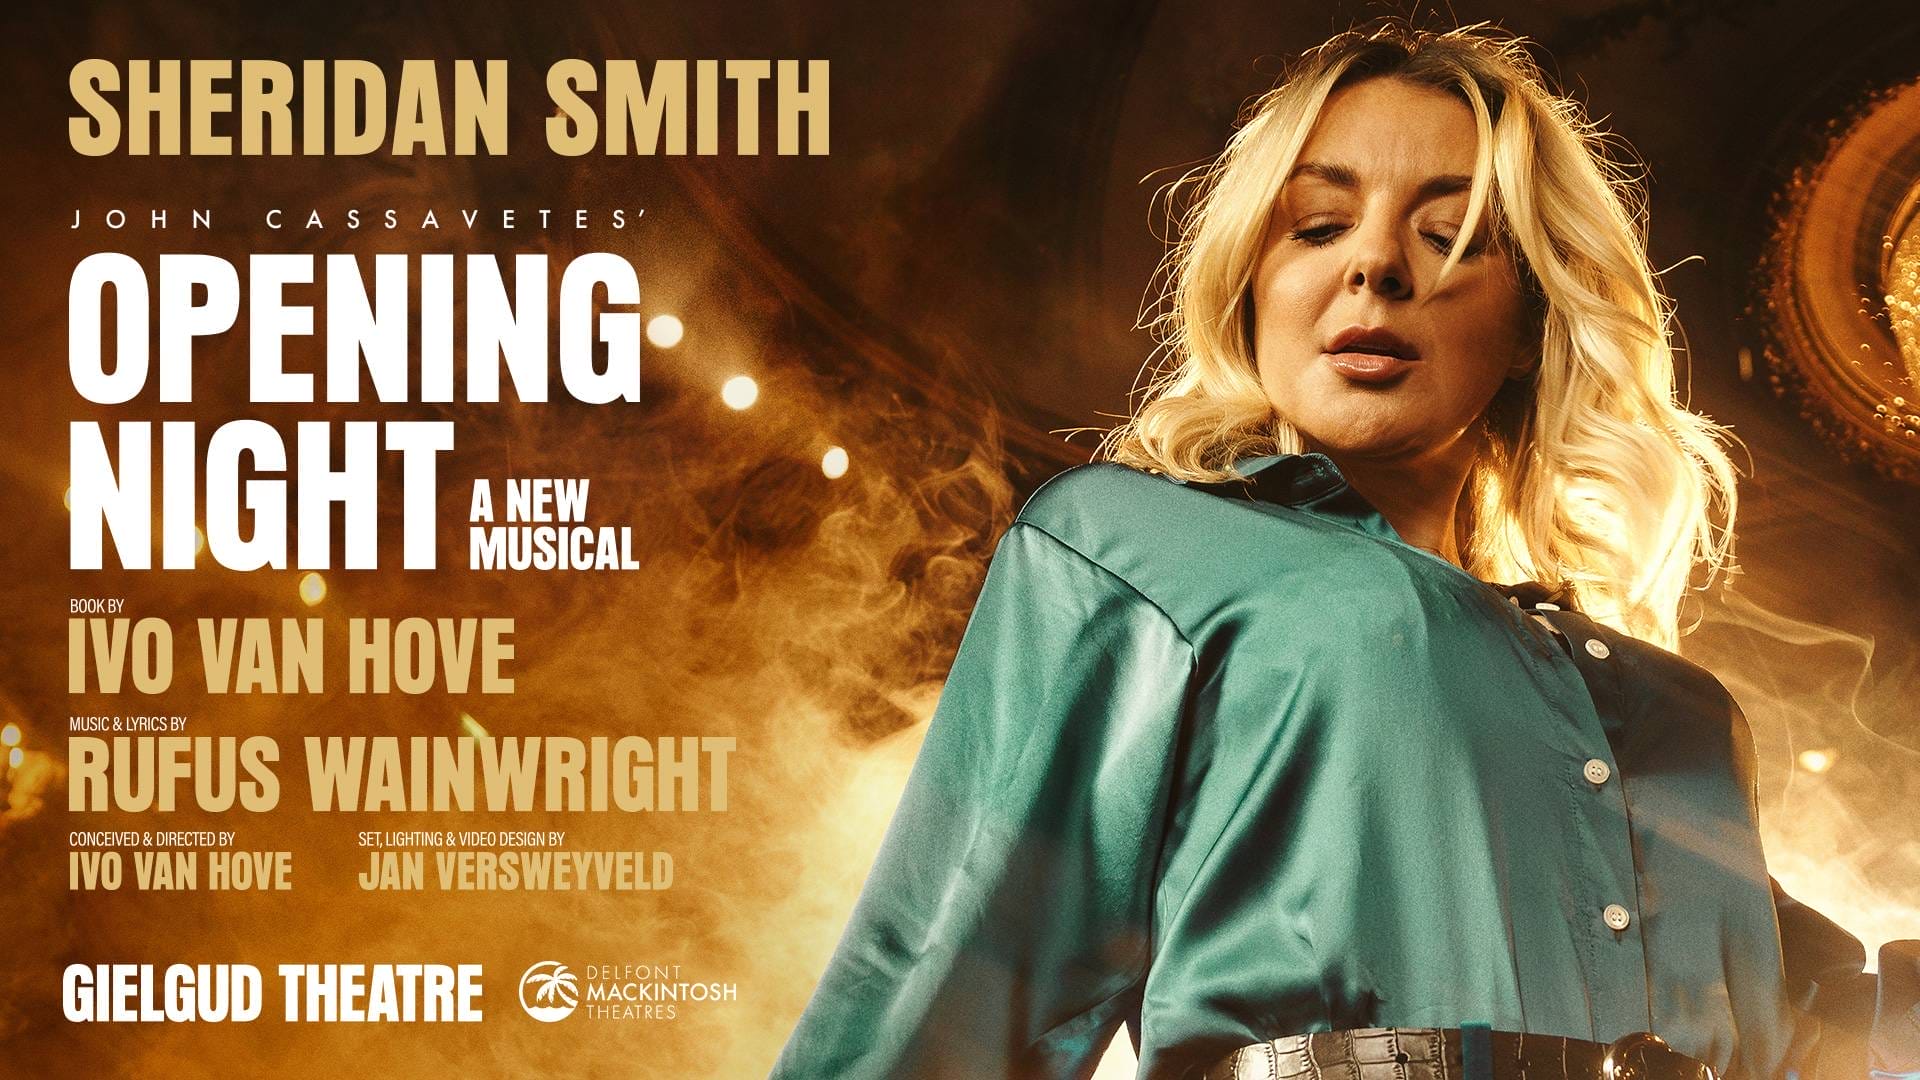 OPENING NIGHT starring Sheridan Smith Oliver Rosser for Feast Creative